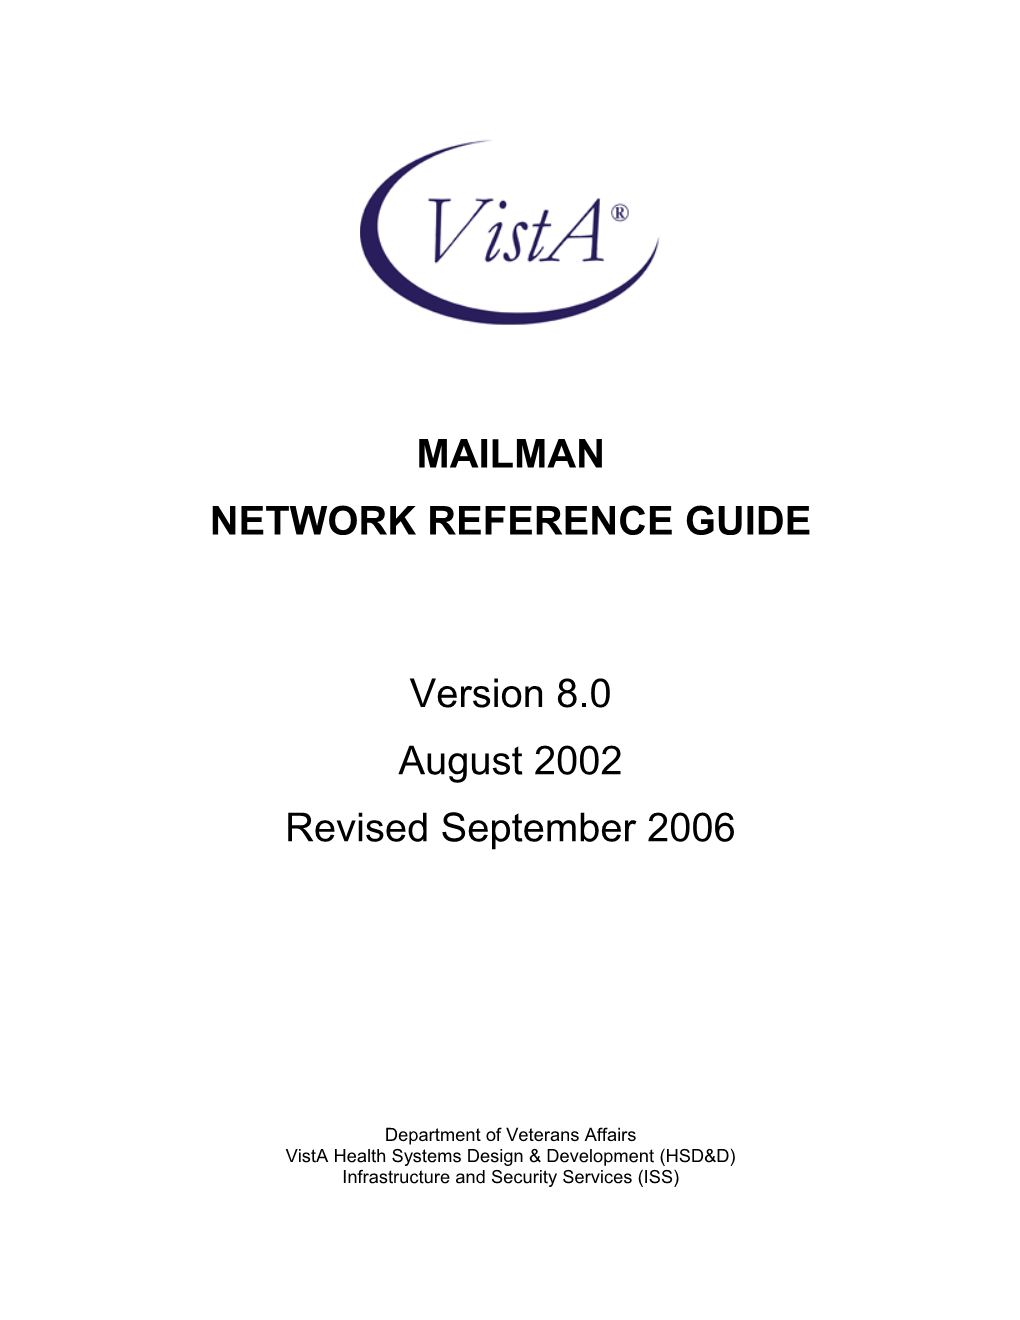 Network Mailman Reference Manual